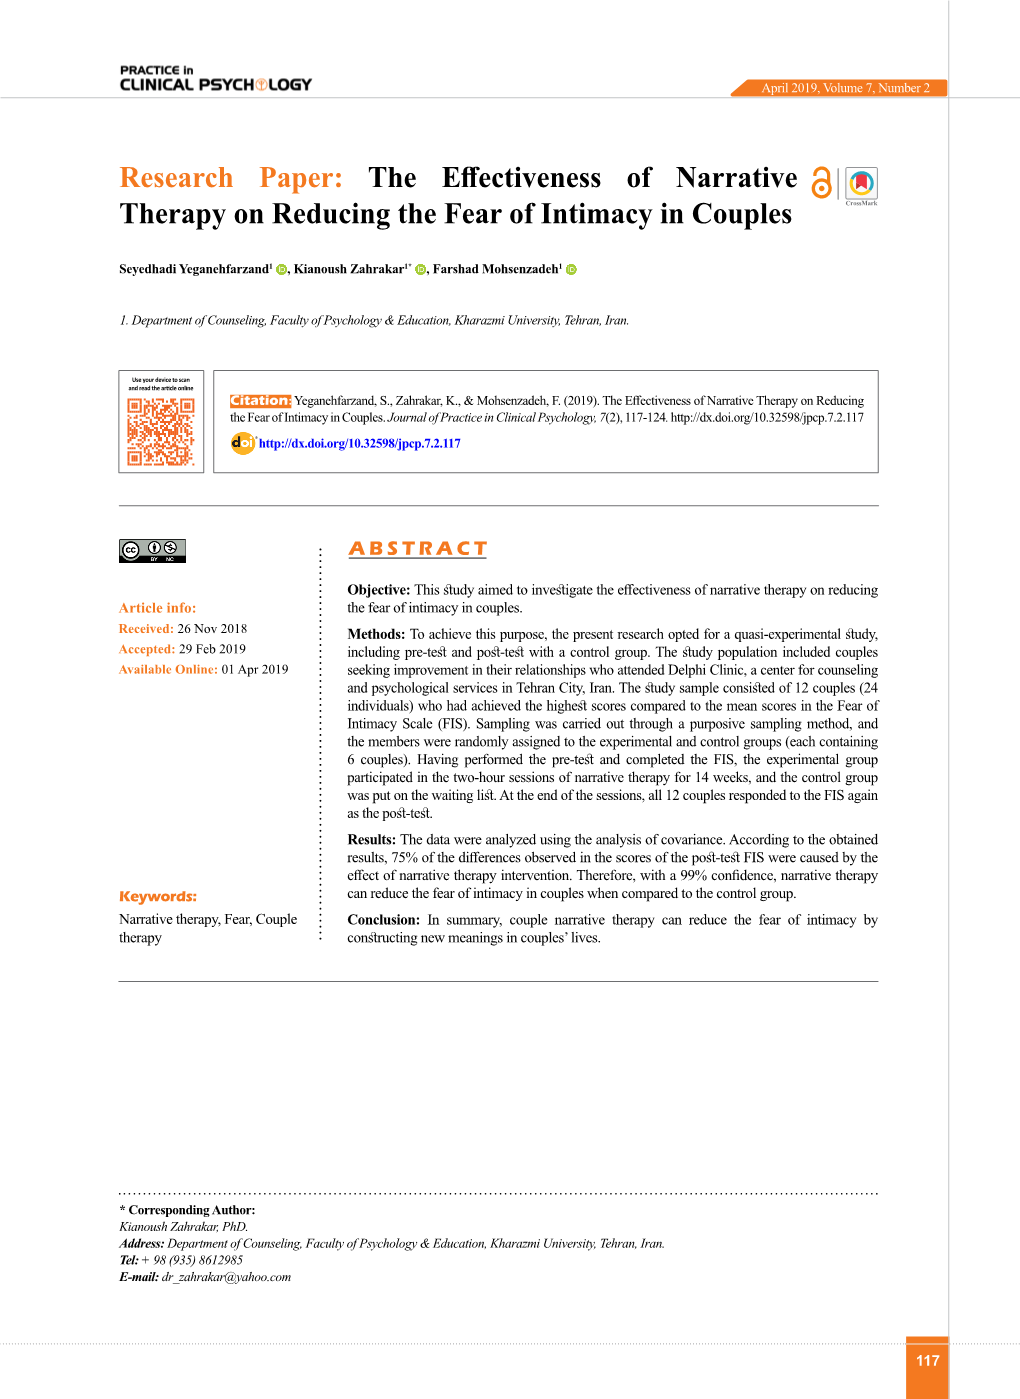 Research Paper: the Effectiveness of Narrative Therapy on Reducing the Fear of Intimacy in Couples